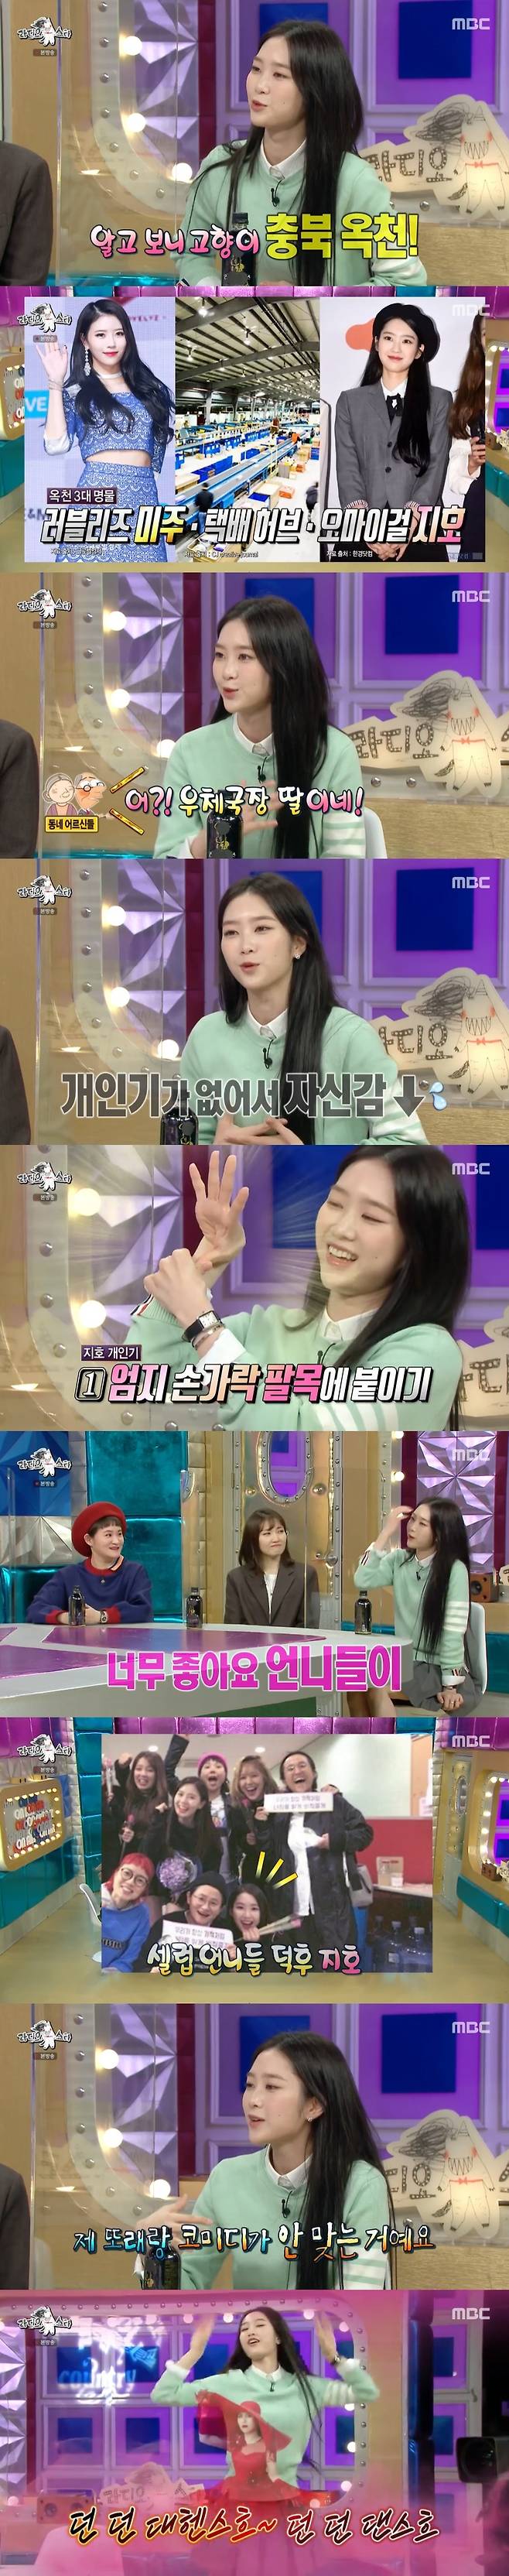 Seoul = = OH MY GIRL JiHo showed off his witty dedication.In the MBC entertainment program Radio Star broadcasted on the afternoon of the 27th, girl group OH MY GIRL member JiHo came out as a guest and attracted attention.JiHo revealed that it was not at all about the first impression that could seem somewhat dodgy.Especially, Hometown is Chungbuk Provincial College, he said. I did not say it was the three famous Chungbuk Provincial College.Lovelies Americas, and Chungbuk Provincial College is famous for its Delivery hub, and it is Baro Judas. JiHo is known in his hometown as the postmasters daughter rather than Idol; he said, Dad is postmaster of Chungbuk Provincial College.I know that many seniors visit the post office often, and I know more as the daughter of the post office than OH MY GIRL JiHo JiHo said he appeared with a burden on his personal life. I saw the members here, but they were very worried about his personal life.The children were noted for singing, Seung-hee for Pikachu, and Choi Hyo-jung for shochu. JiHo said, I was worried because I did not have an individual.I do not have it, but I have prepared it. JiHo, who is more flexible than others, showed flexibility with a unique personal skill such as touching the wrist of the thumb and turning the arm 360 degrees.MC Kim Gura said, There are five people who showed this personal period to Radio Star in 10 years.JiHo also revealed his friendship with Celeb five, saying he was the best of the group and that sisters are funny and so good.I did not have a peer comedy, and the laughing code is different. Then, he added fun by revealing the secrets of charm and charm that were handed down to Celeb five Shin Bong-sun.Ahn Young Mi and Kim Shin-Young, who watched this, said, I taught him not to go anywhere and fall behind.On this day, JiHo also recalled the days of Idol Producer.When Rooftop Moonlights hit song Sui Gu, Even Today was mentioned, he recalled hearing the song for the first time in hard times.JiHo said, There was a time when I was worried about quitting when Idol Producer.I told a sister who was like Idol Producer that I could not do it, I think I should find something else. She sang this song Sui Gu, today.It was the first time I heard it, so when I first met my sister (Kim Yoon-joo), I was so fresh. JiHo, who was asked I heard that there is something in charge of the OH MY GIRL, replied I am in charge of the prevention.After Corona 19, we always had gloves, face shields, masks and disinfectant sprays; its a little safer after we got the vaccine, he said.In the studio, JiHos station costume was revealed and robbed of his gaze.I had this reaction in my comment, JiHo really wants to live. JiHo said, making the surrounding area into a laughing sea.I had a kind of a prick in my junior high school, but I did not want to open the door with my hand, so I waited until someone else opened it, he said honestly.I was careful to keep the rules on stage. JiHo said, Is not it a rule to minimize physical contact? There is a movement to work with Mimi in our choreography.But I didnt take my hand. She was embarrassed. Then I tried to catch her choreography, but she didnt. She seemed to care for me.Ahn Young Mi said, It became a dance to keep distance for a moment.In addition to JiHo, singer Yang Hee Eun, gag woman Kim Shin-Young, and Rooftop Moonlight member Kim Yoon-joo appeared as guests on the day.